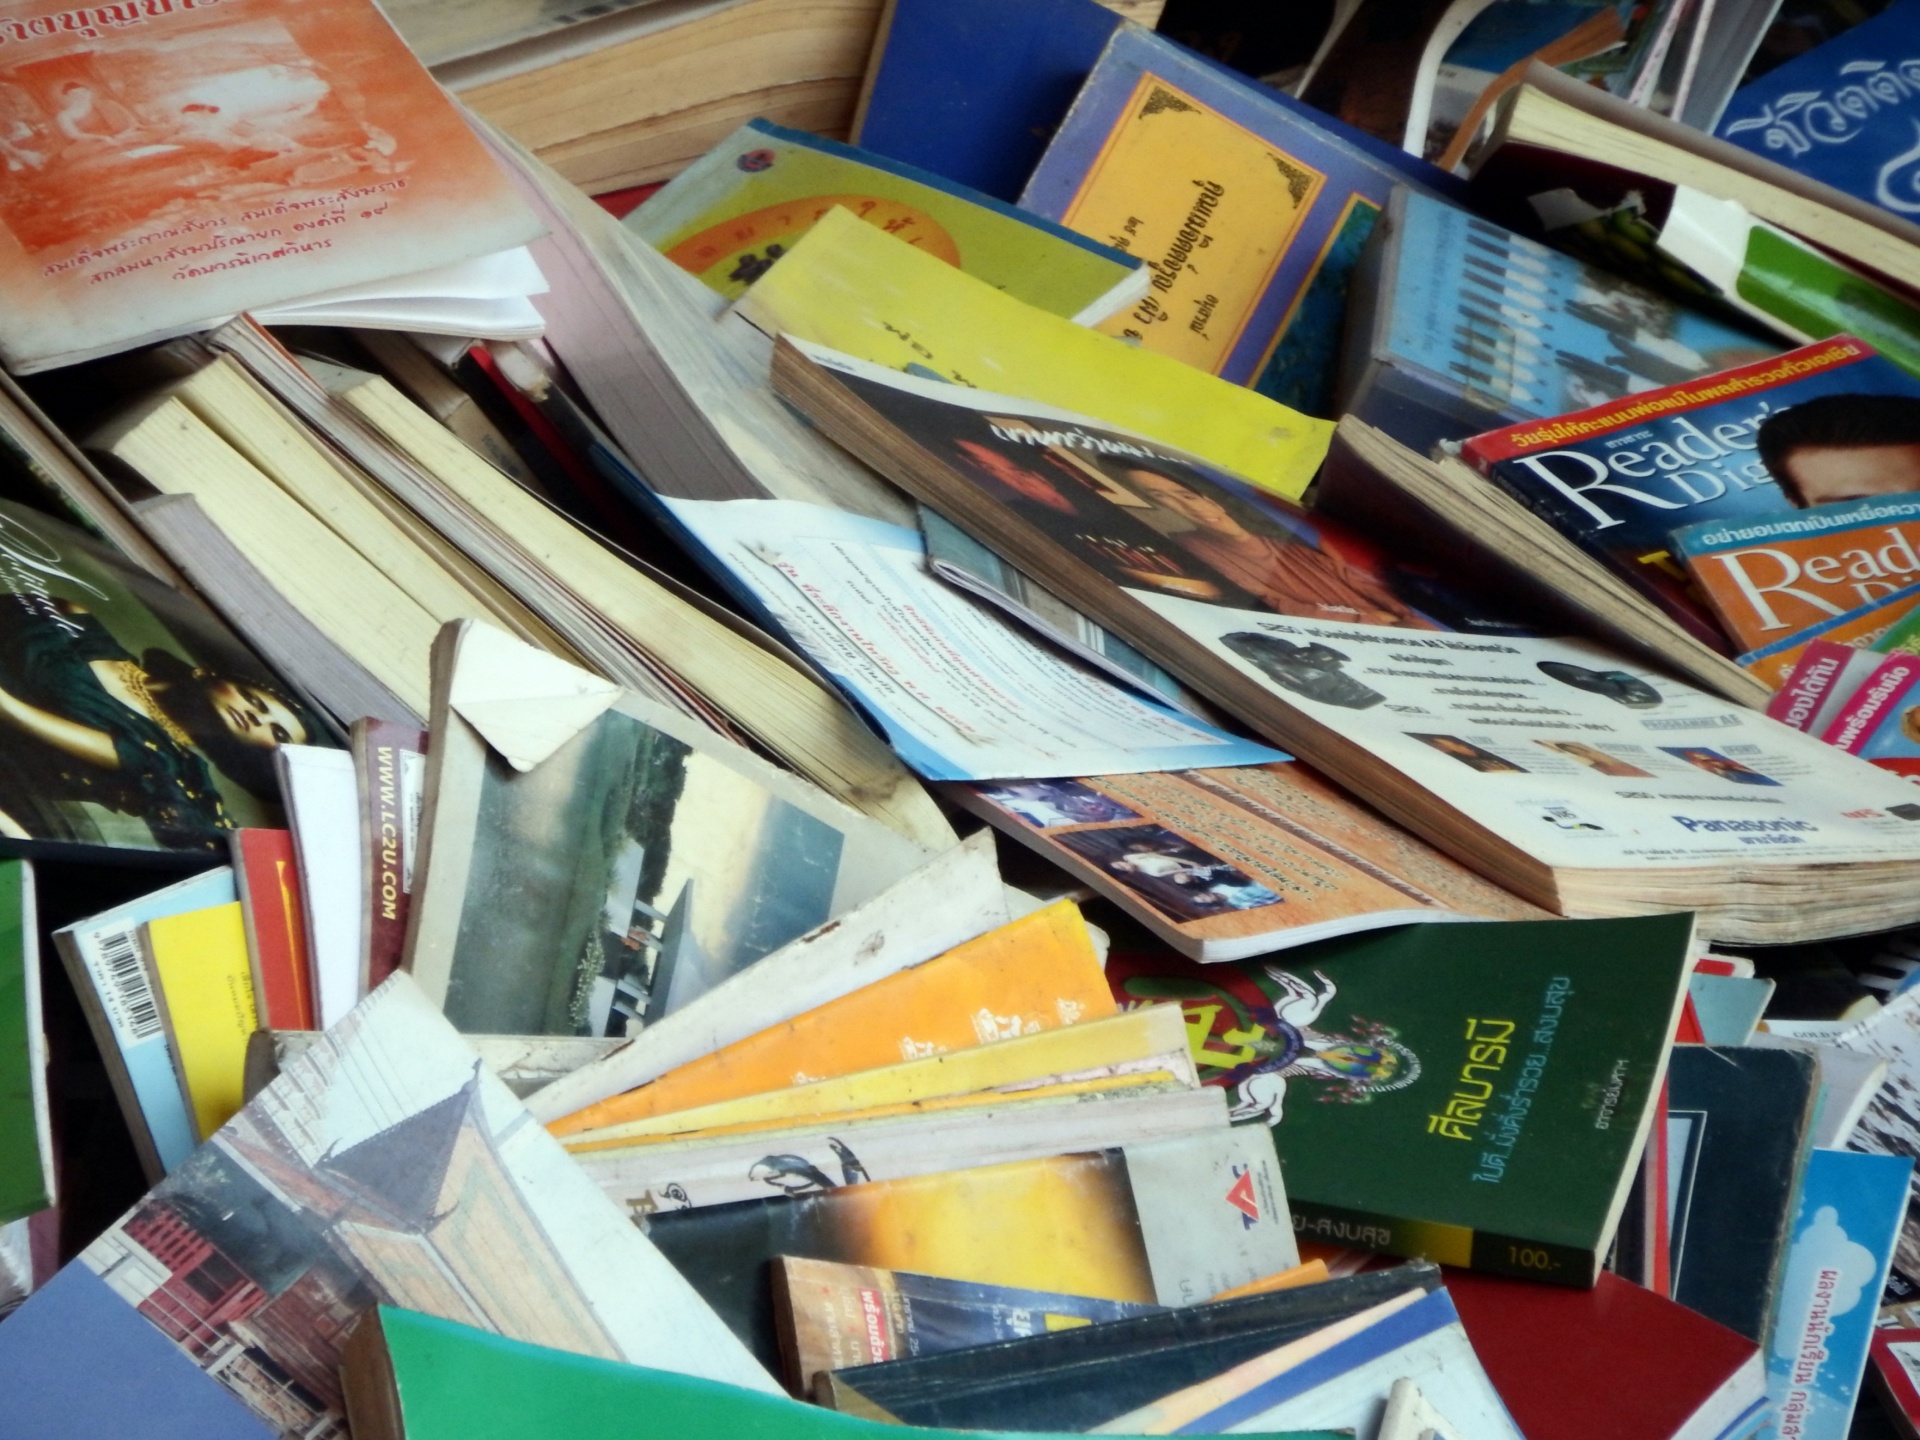 books,pile,old,junk,rubbish,recycling,paper,jumble,sale,trash,book,read,reading,library,clear,clear out,throw away,lots,many,lot,pile of old books,free pictures, free photos, free images, royalty free, free illustrations, public domain